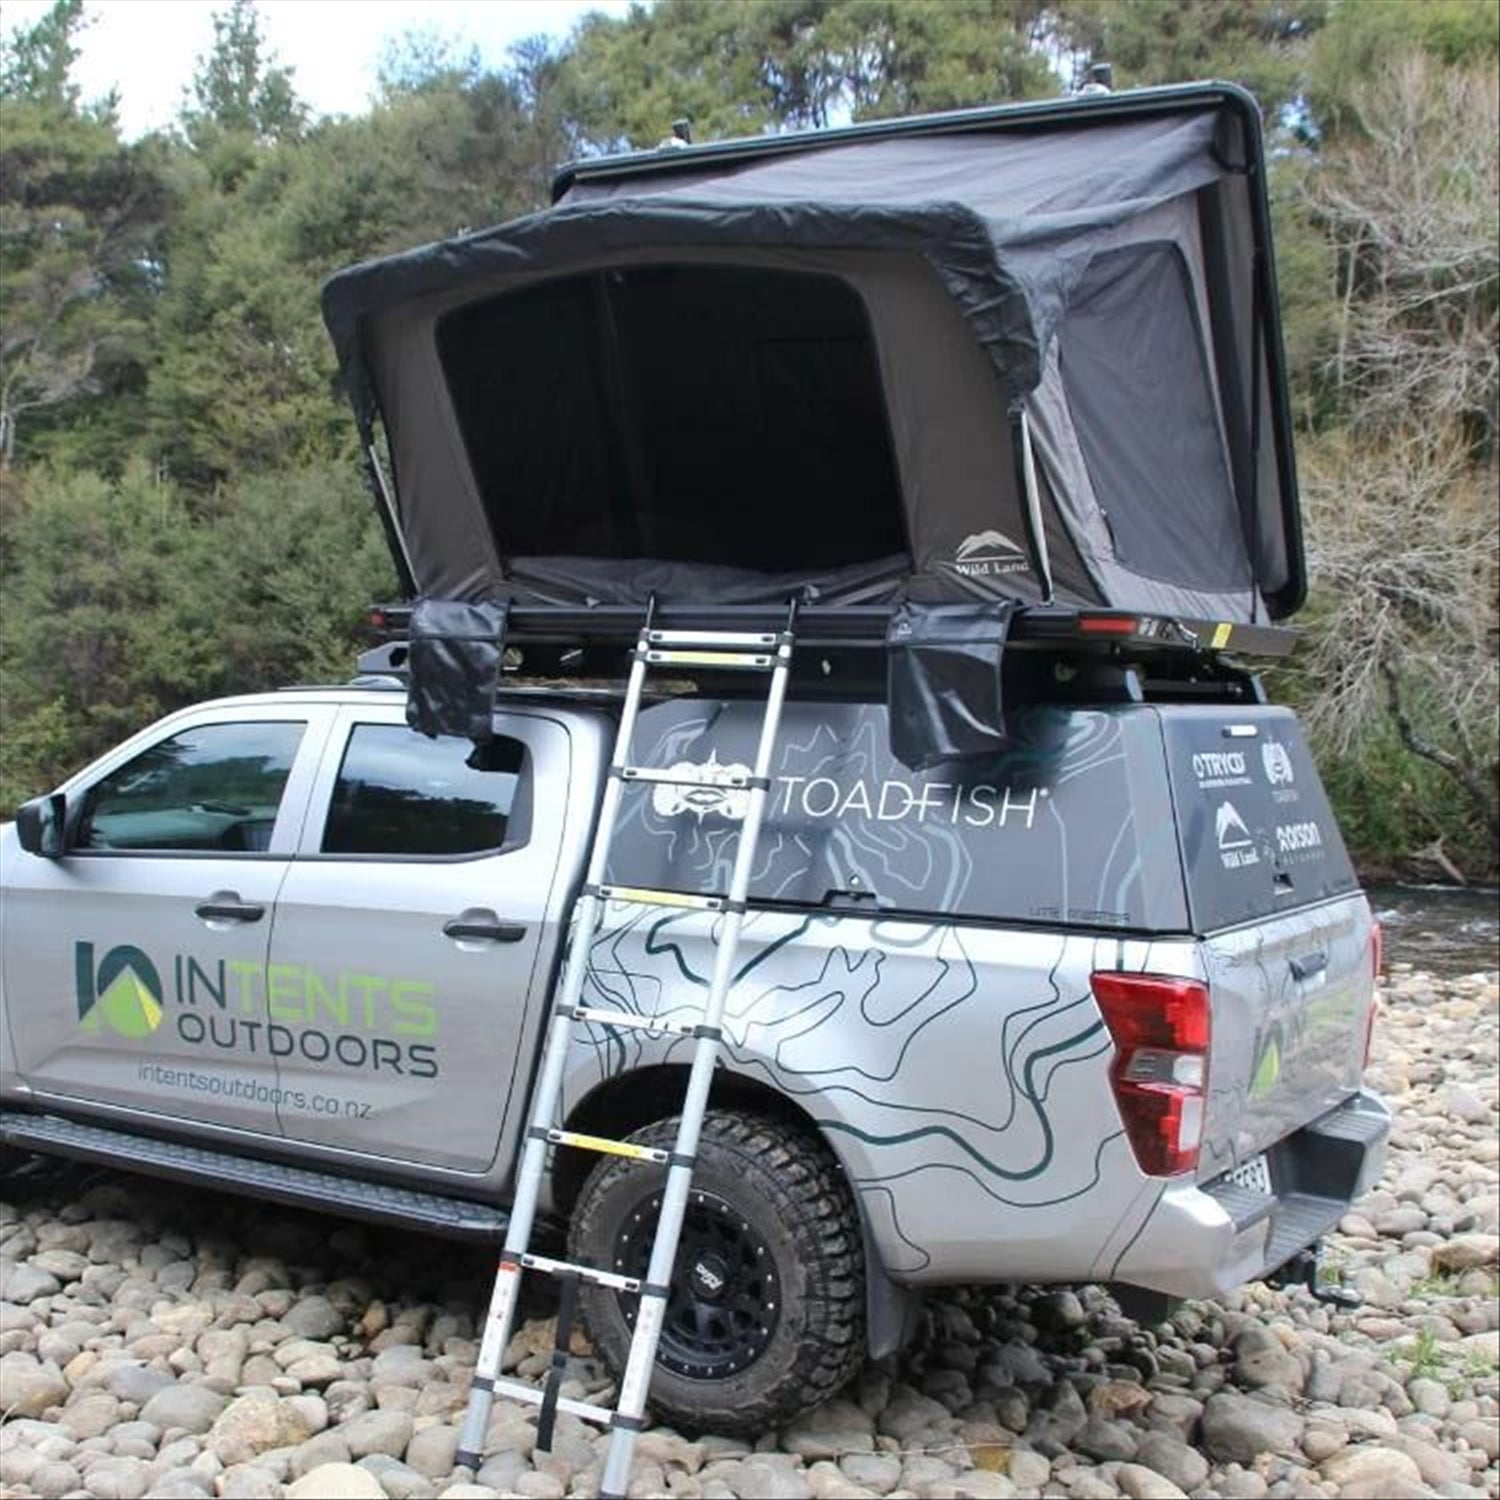 Wild Land DC2 Aluminium Hard Shell Roof Top Tent includes free cargo racks - 120cm or 140cm wide